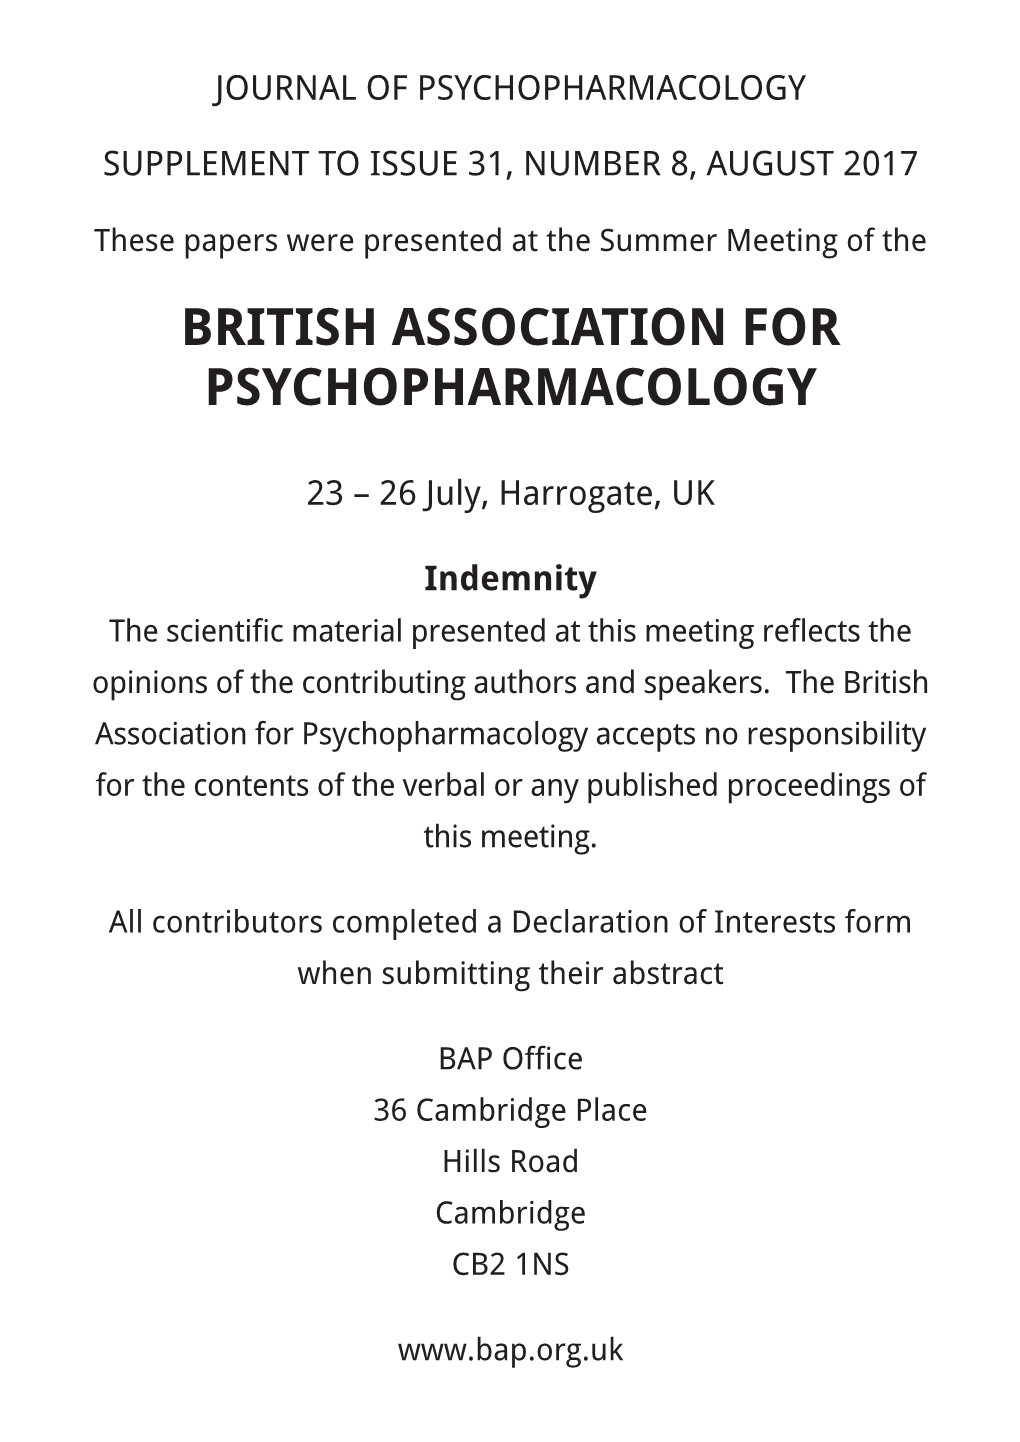 The BRITISH ASSOCIATION for PSYCHOPHARMACOLOGY